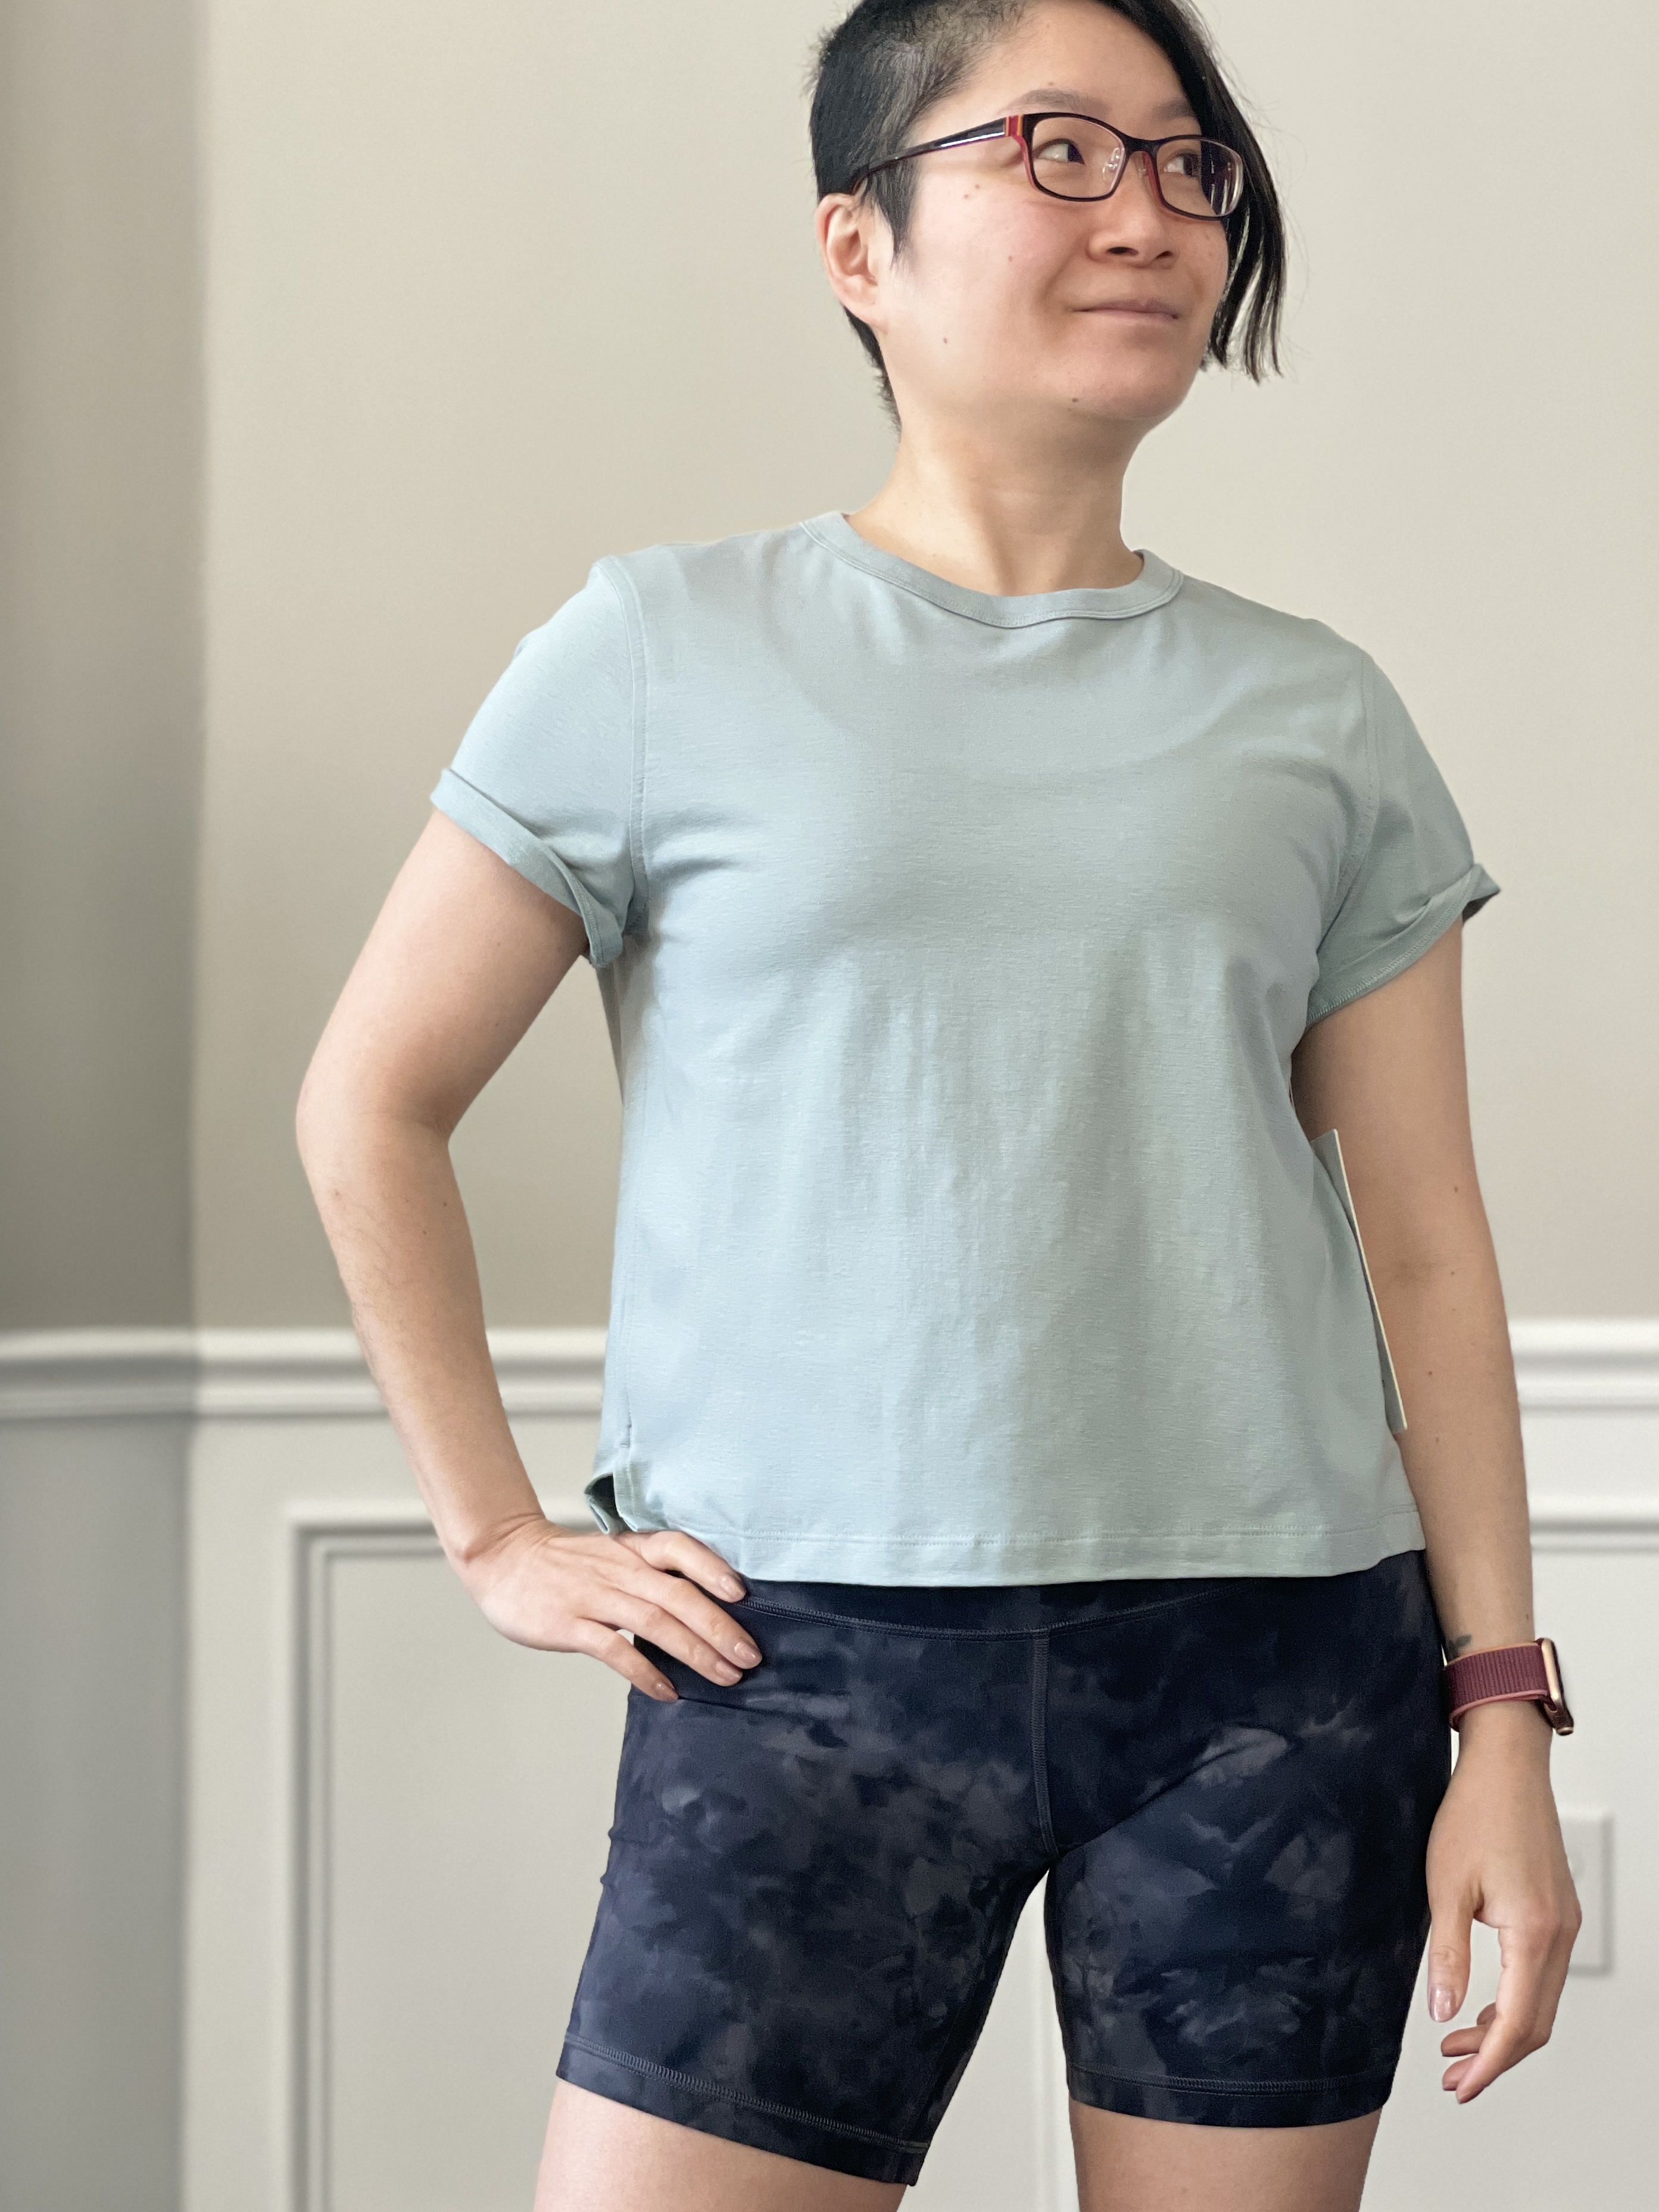 Allbirds Sale Biggest Cropped Classic-Fit Tee, Oversized Friday! Cates Softstreme Crew Plus T-Shirt, Perfectly Cotton-Blend Starts Review Today! Fit